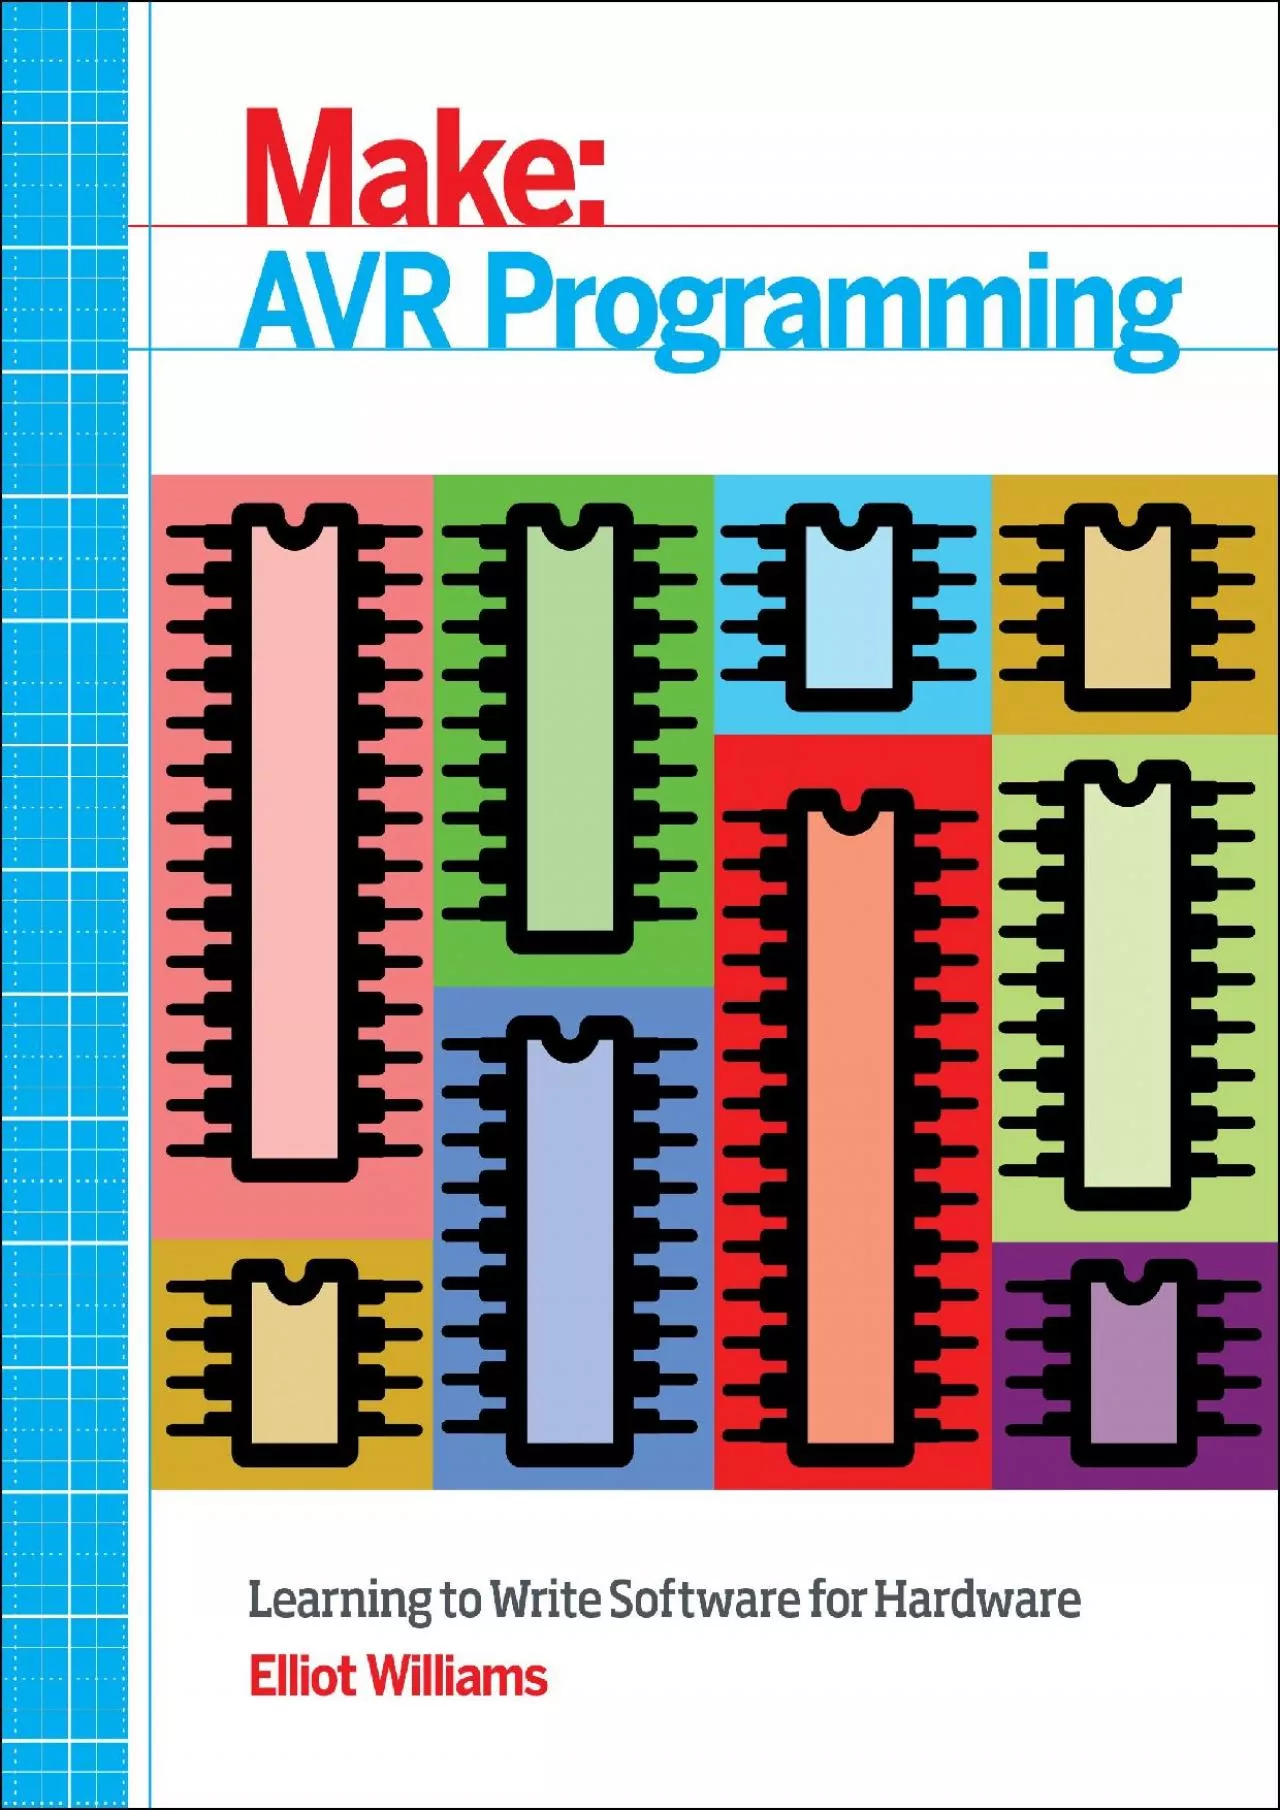 [DOWLOAD]-AVR Programming: Learning to Write Software for Hardware (Make: Technology on